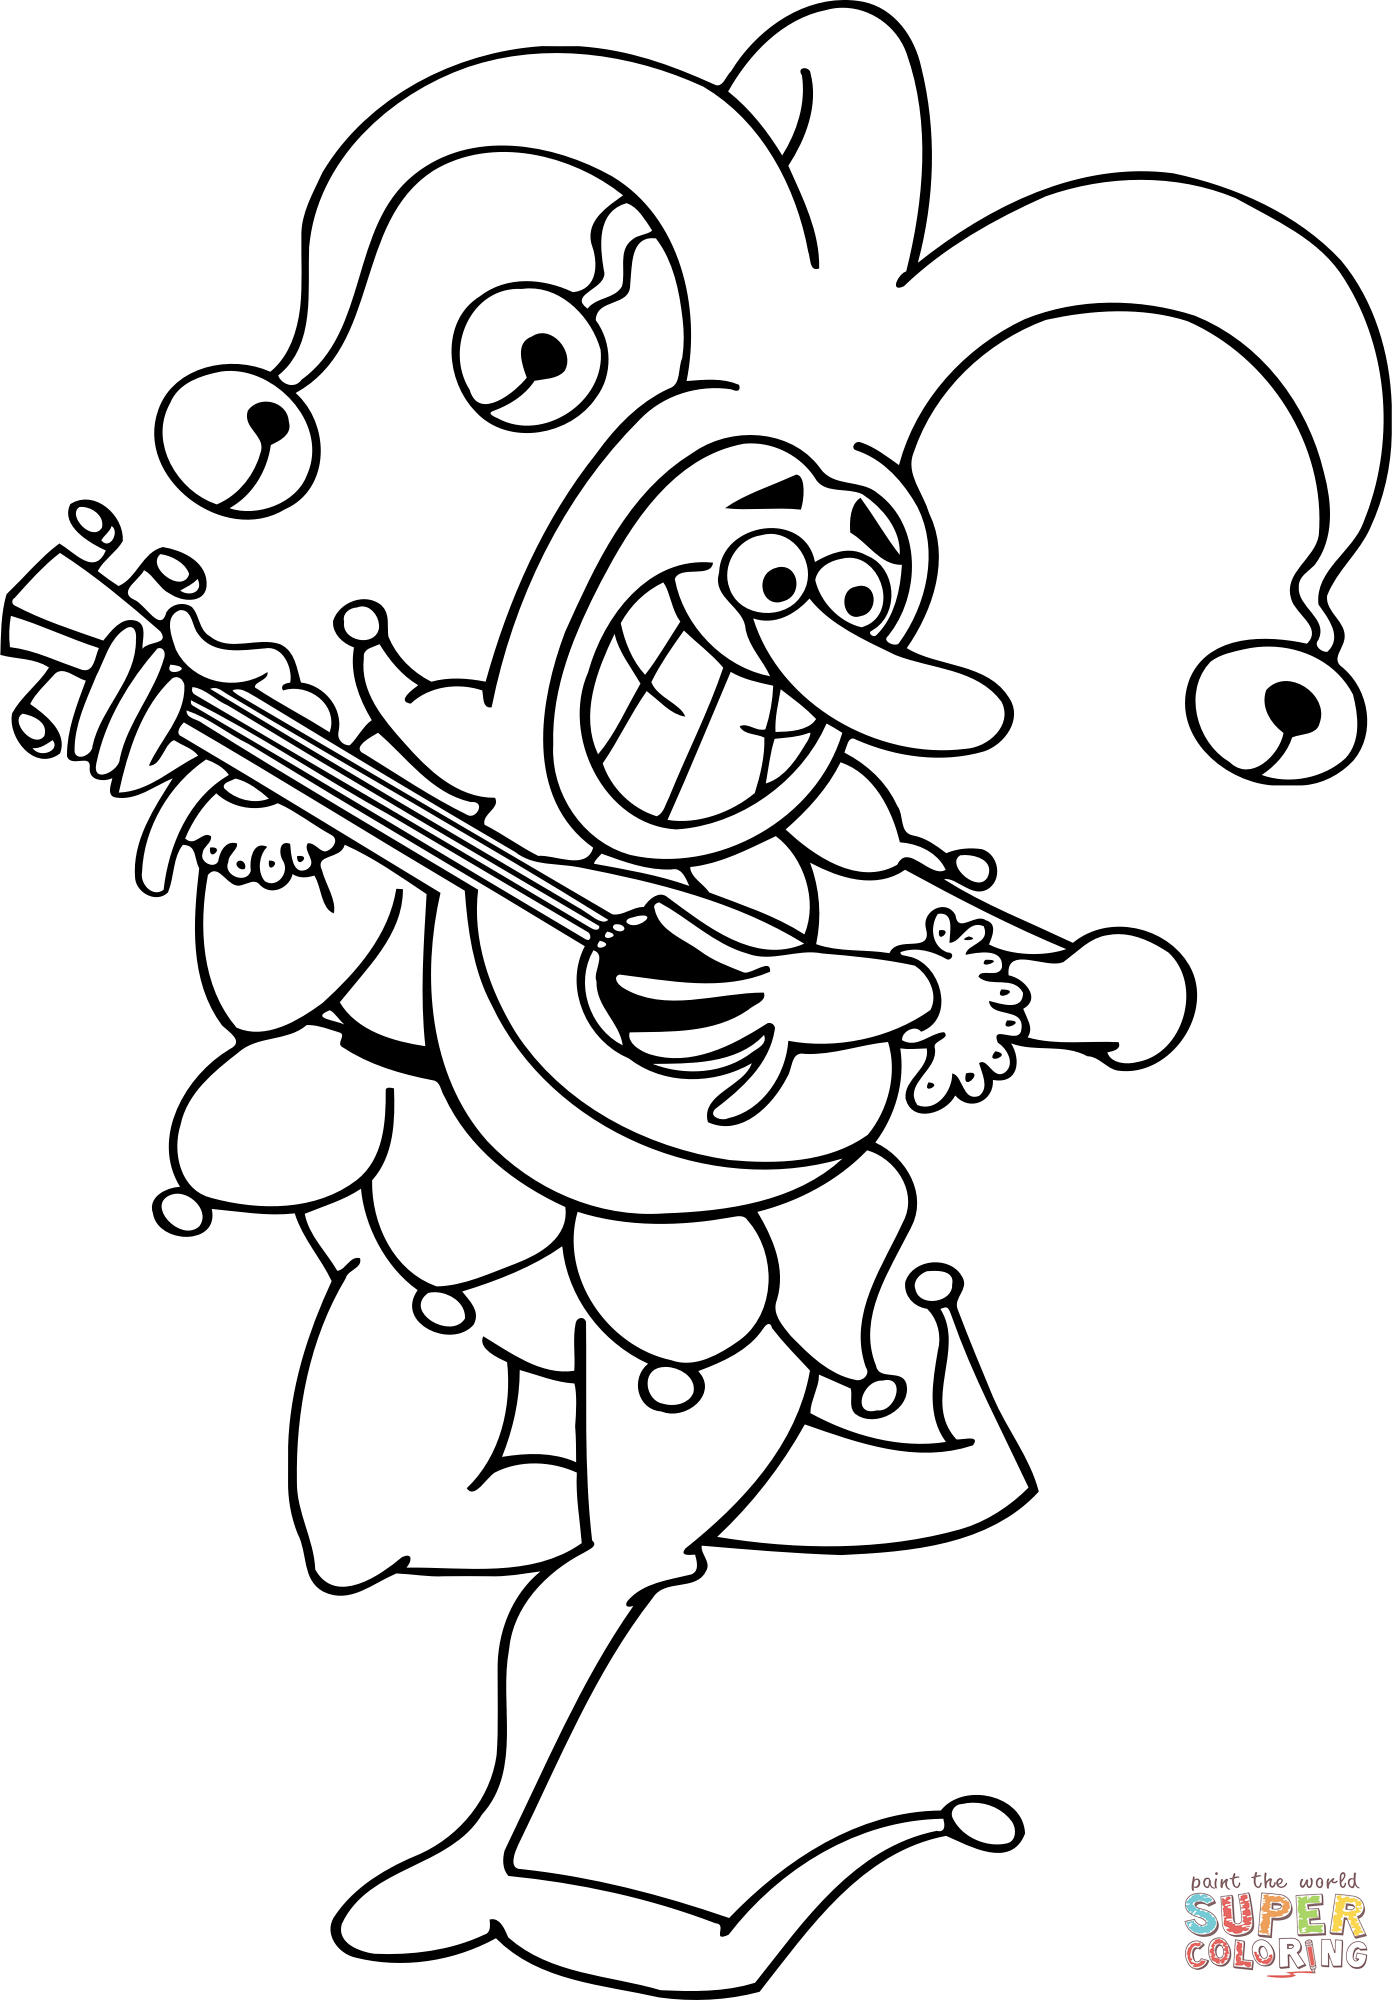 Jester Outline coloring page | Free Printable Coloring Pages